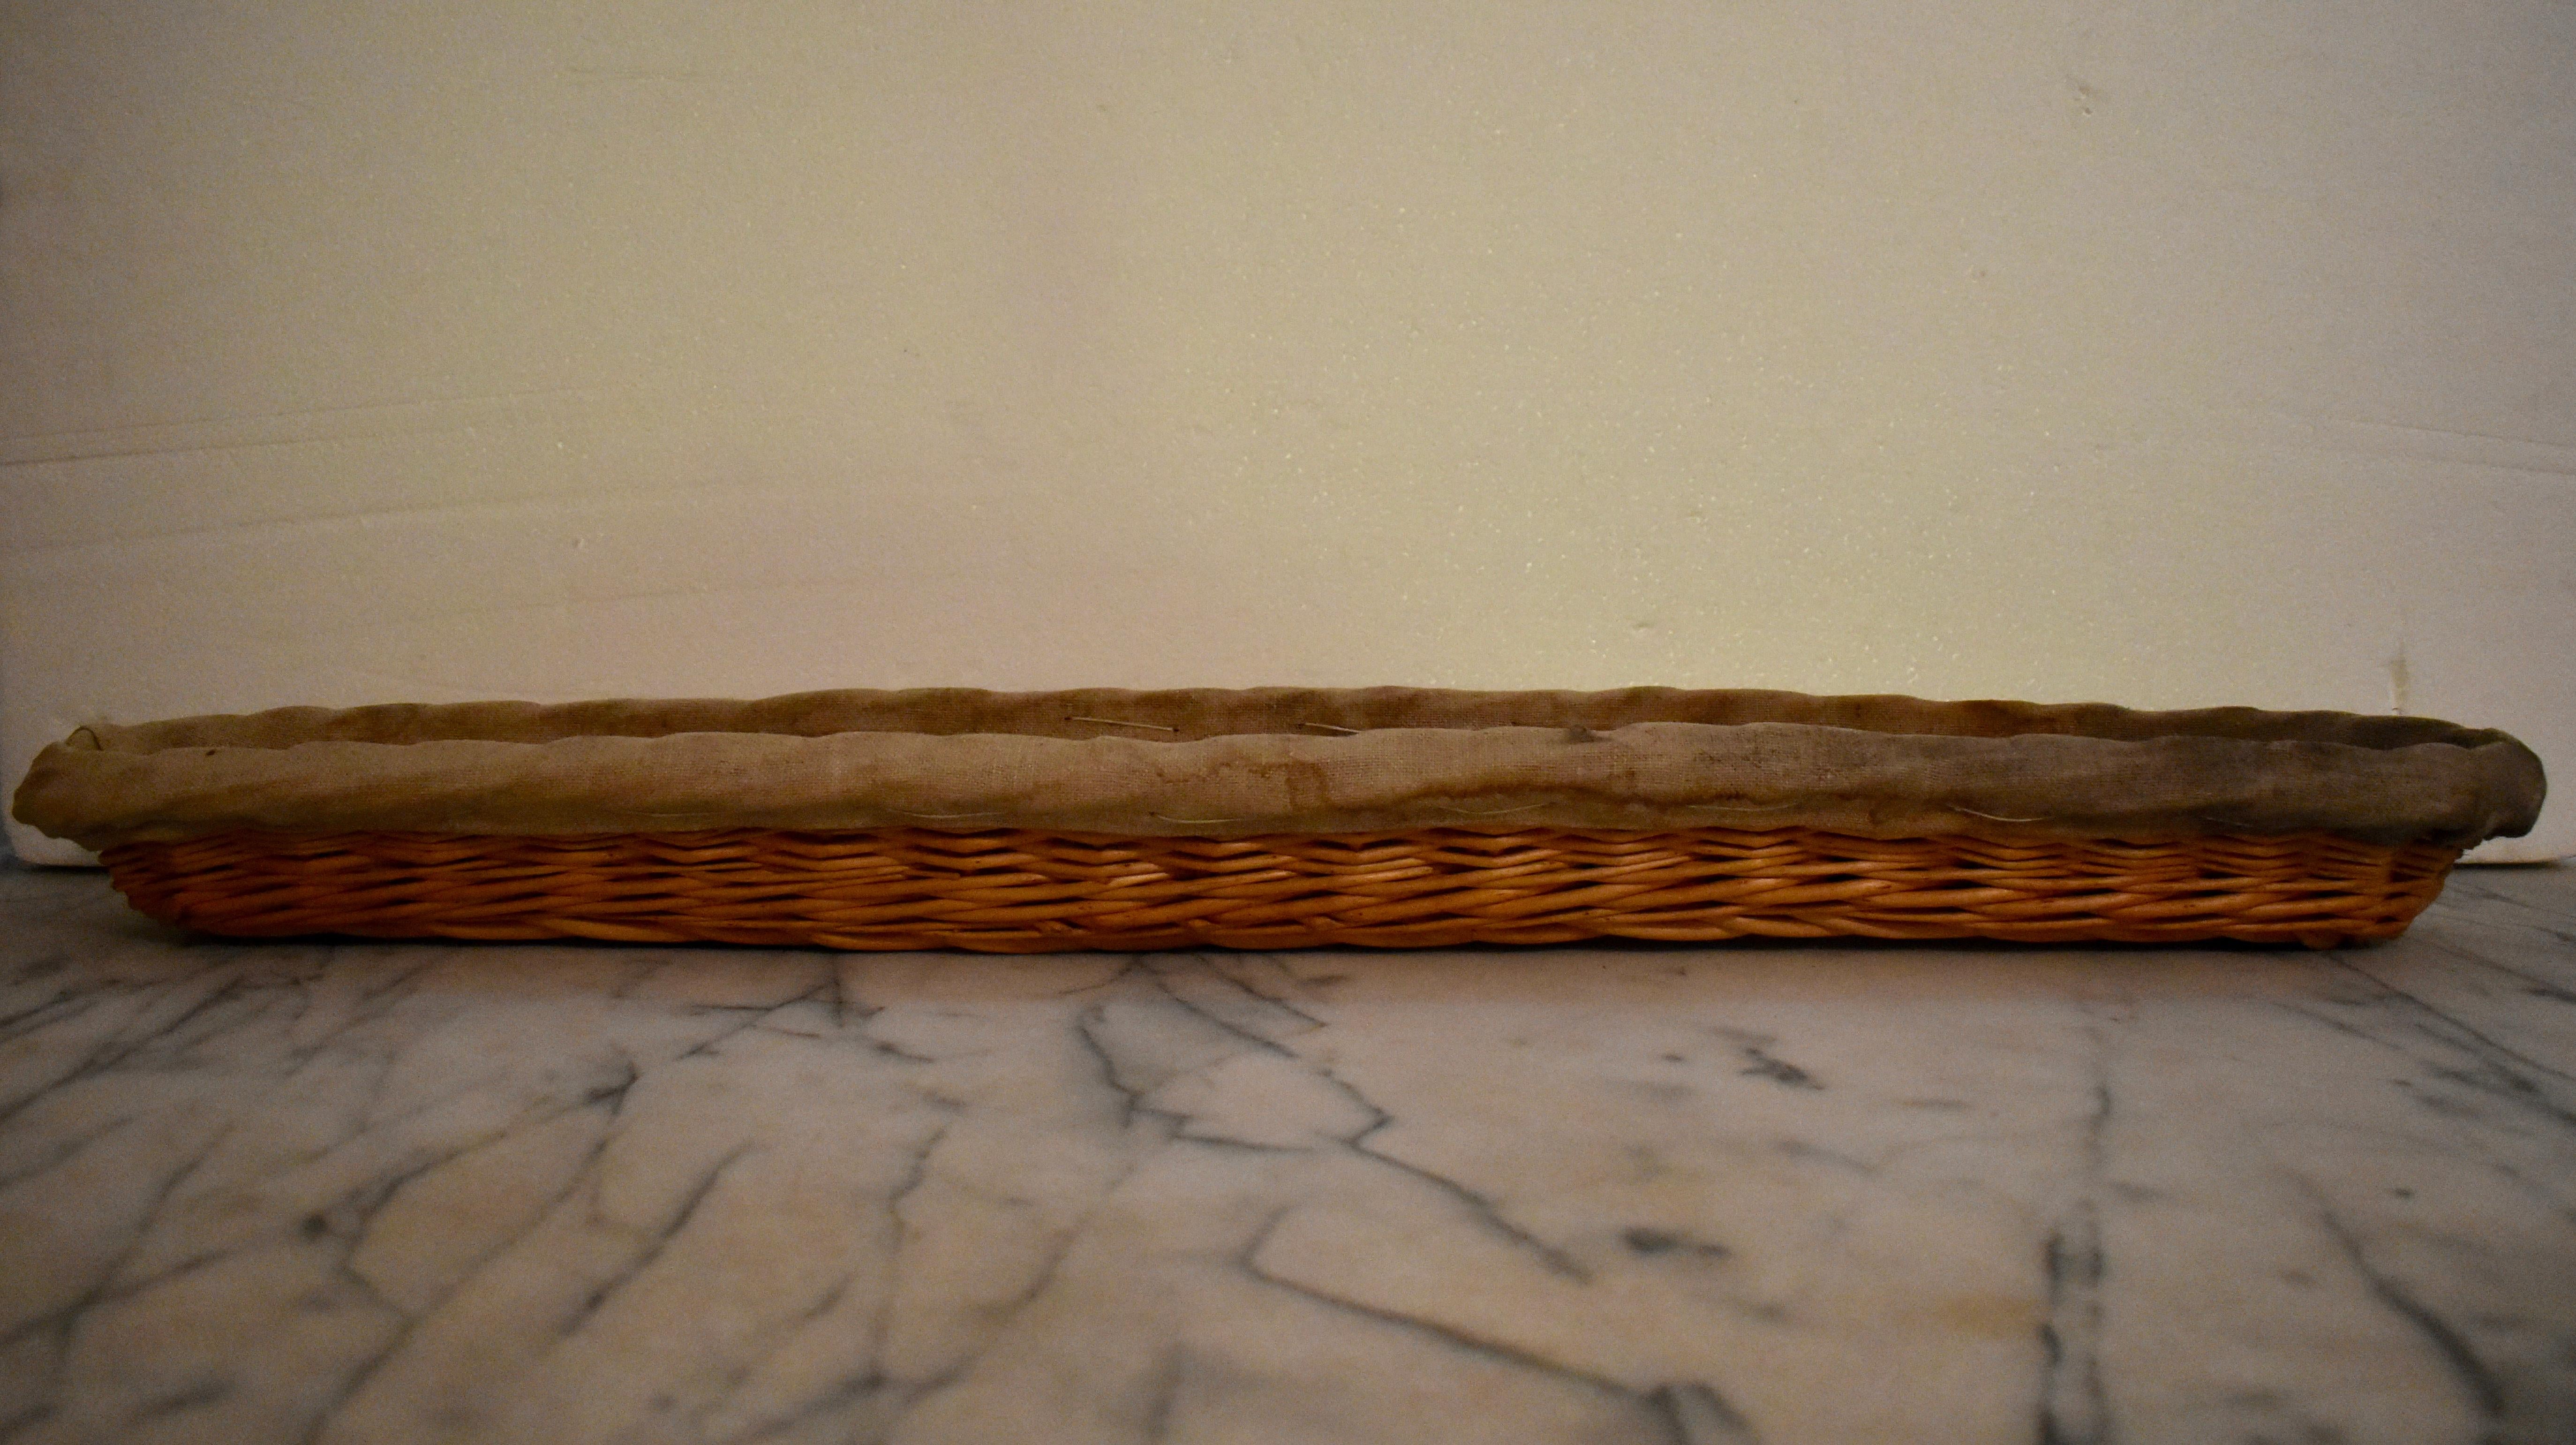 A rustic antique Boulangerie baguette proving basket with a linen liner, known as a banneton, from Brittany, France, circa early 1900s.

Nearly 33 inches long, these baskets were used in bakeries or boulangeries throughout France. The willow basket